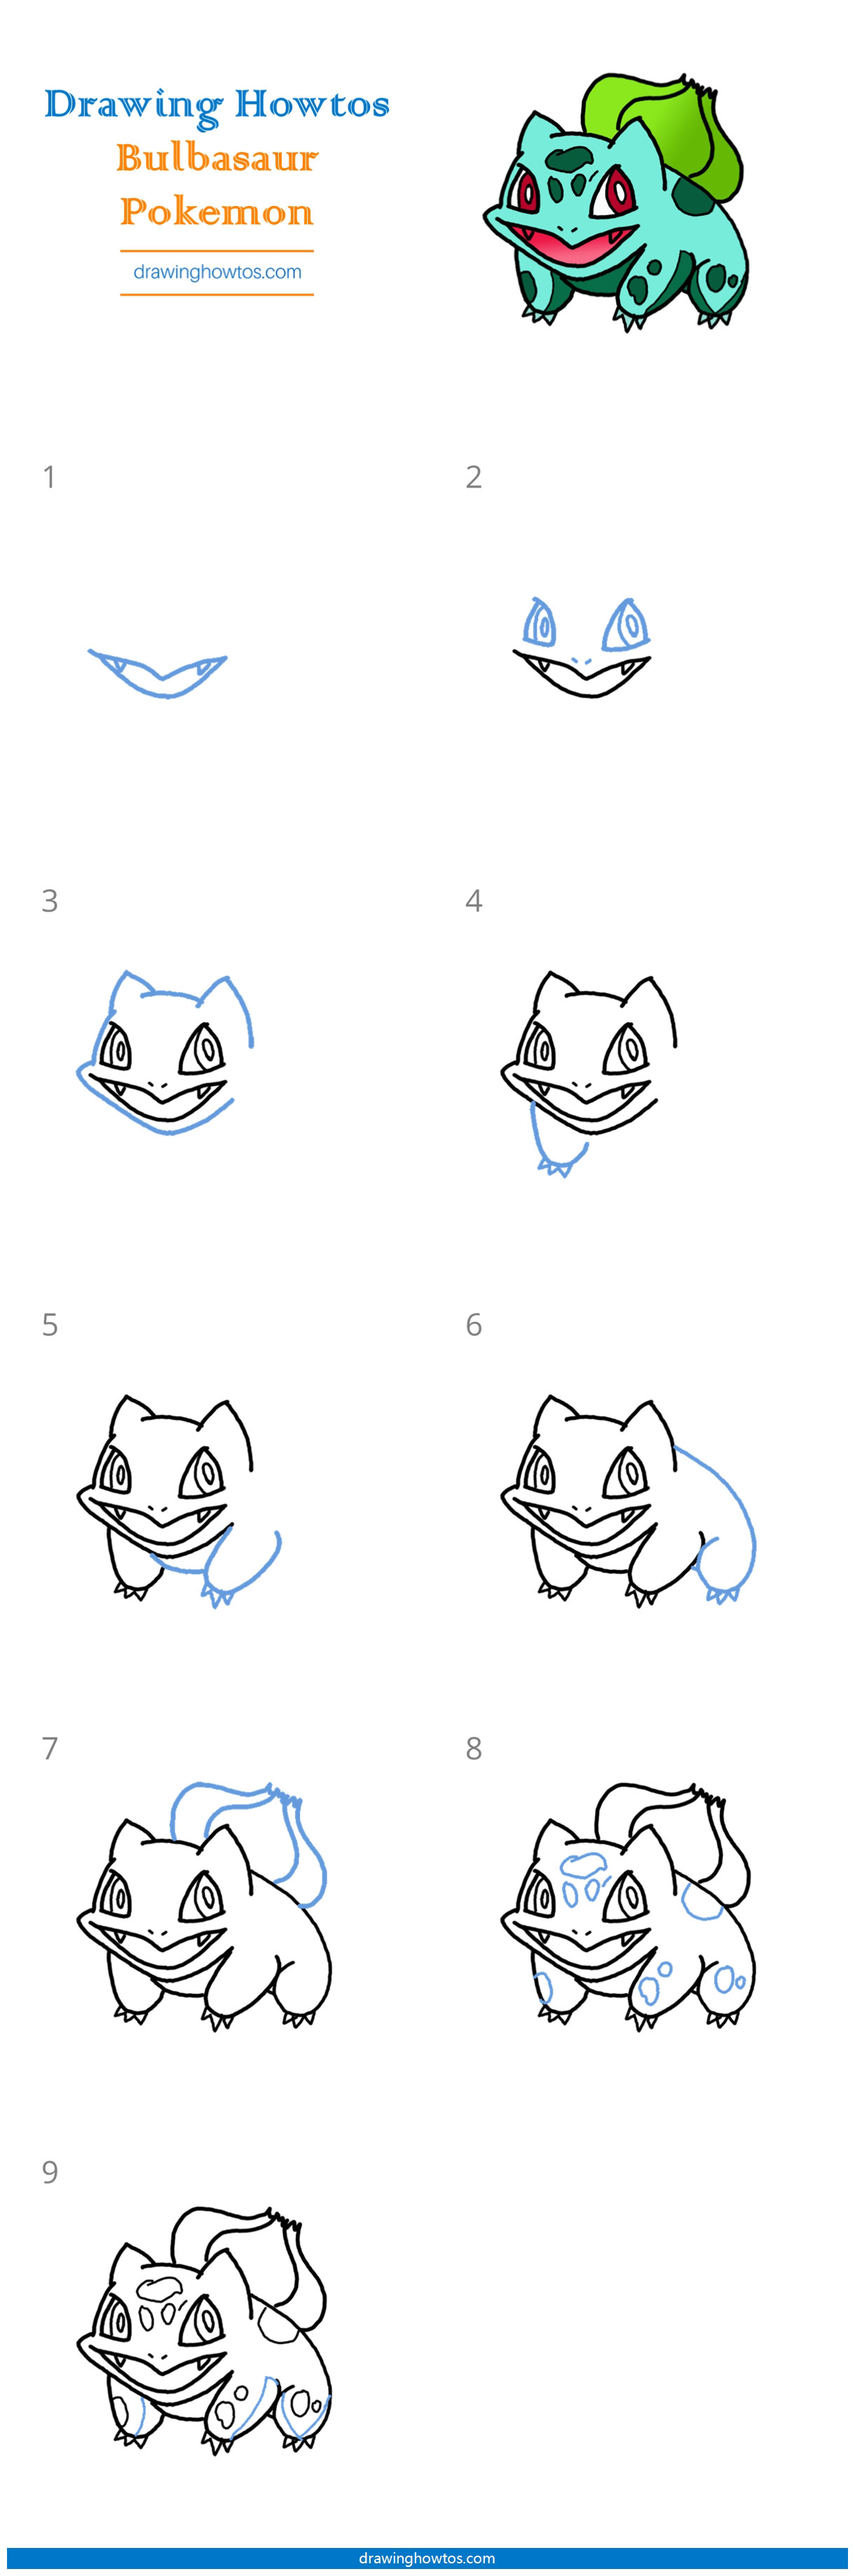 How to Draw Pokemon Bulbasaur Step by Step